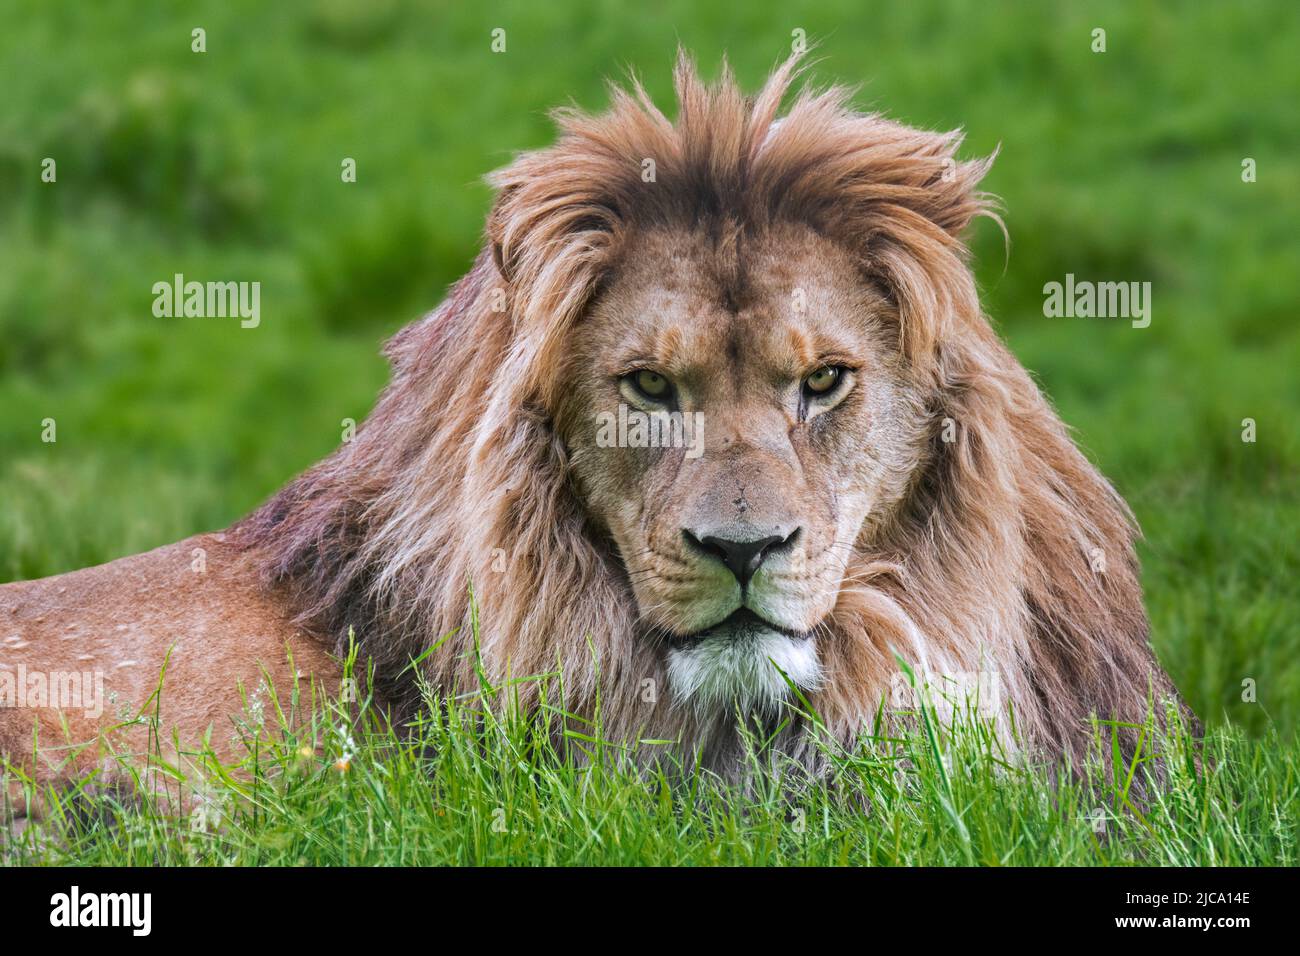 Barbary lion / North African lion / Berber lion / Atlas lion / Egyptian lion (Panthera leo leo) fierce looking male, extinct in the wild Stock Photo